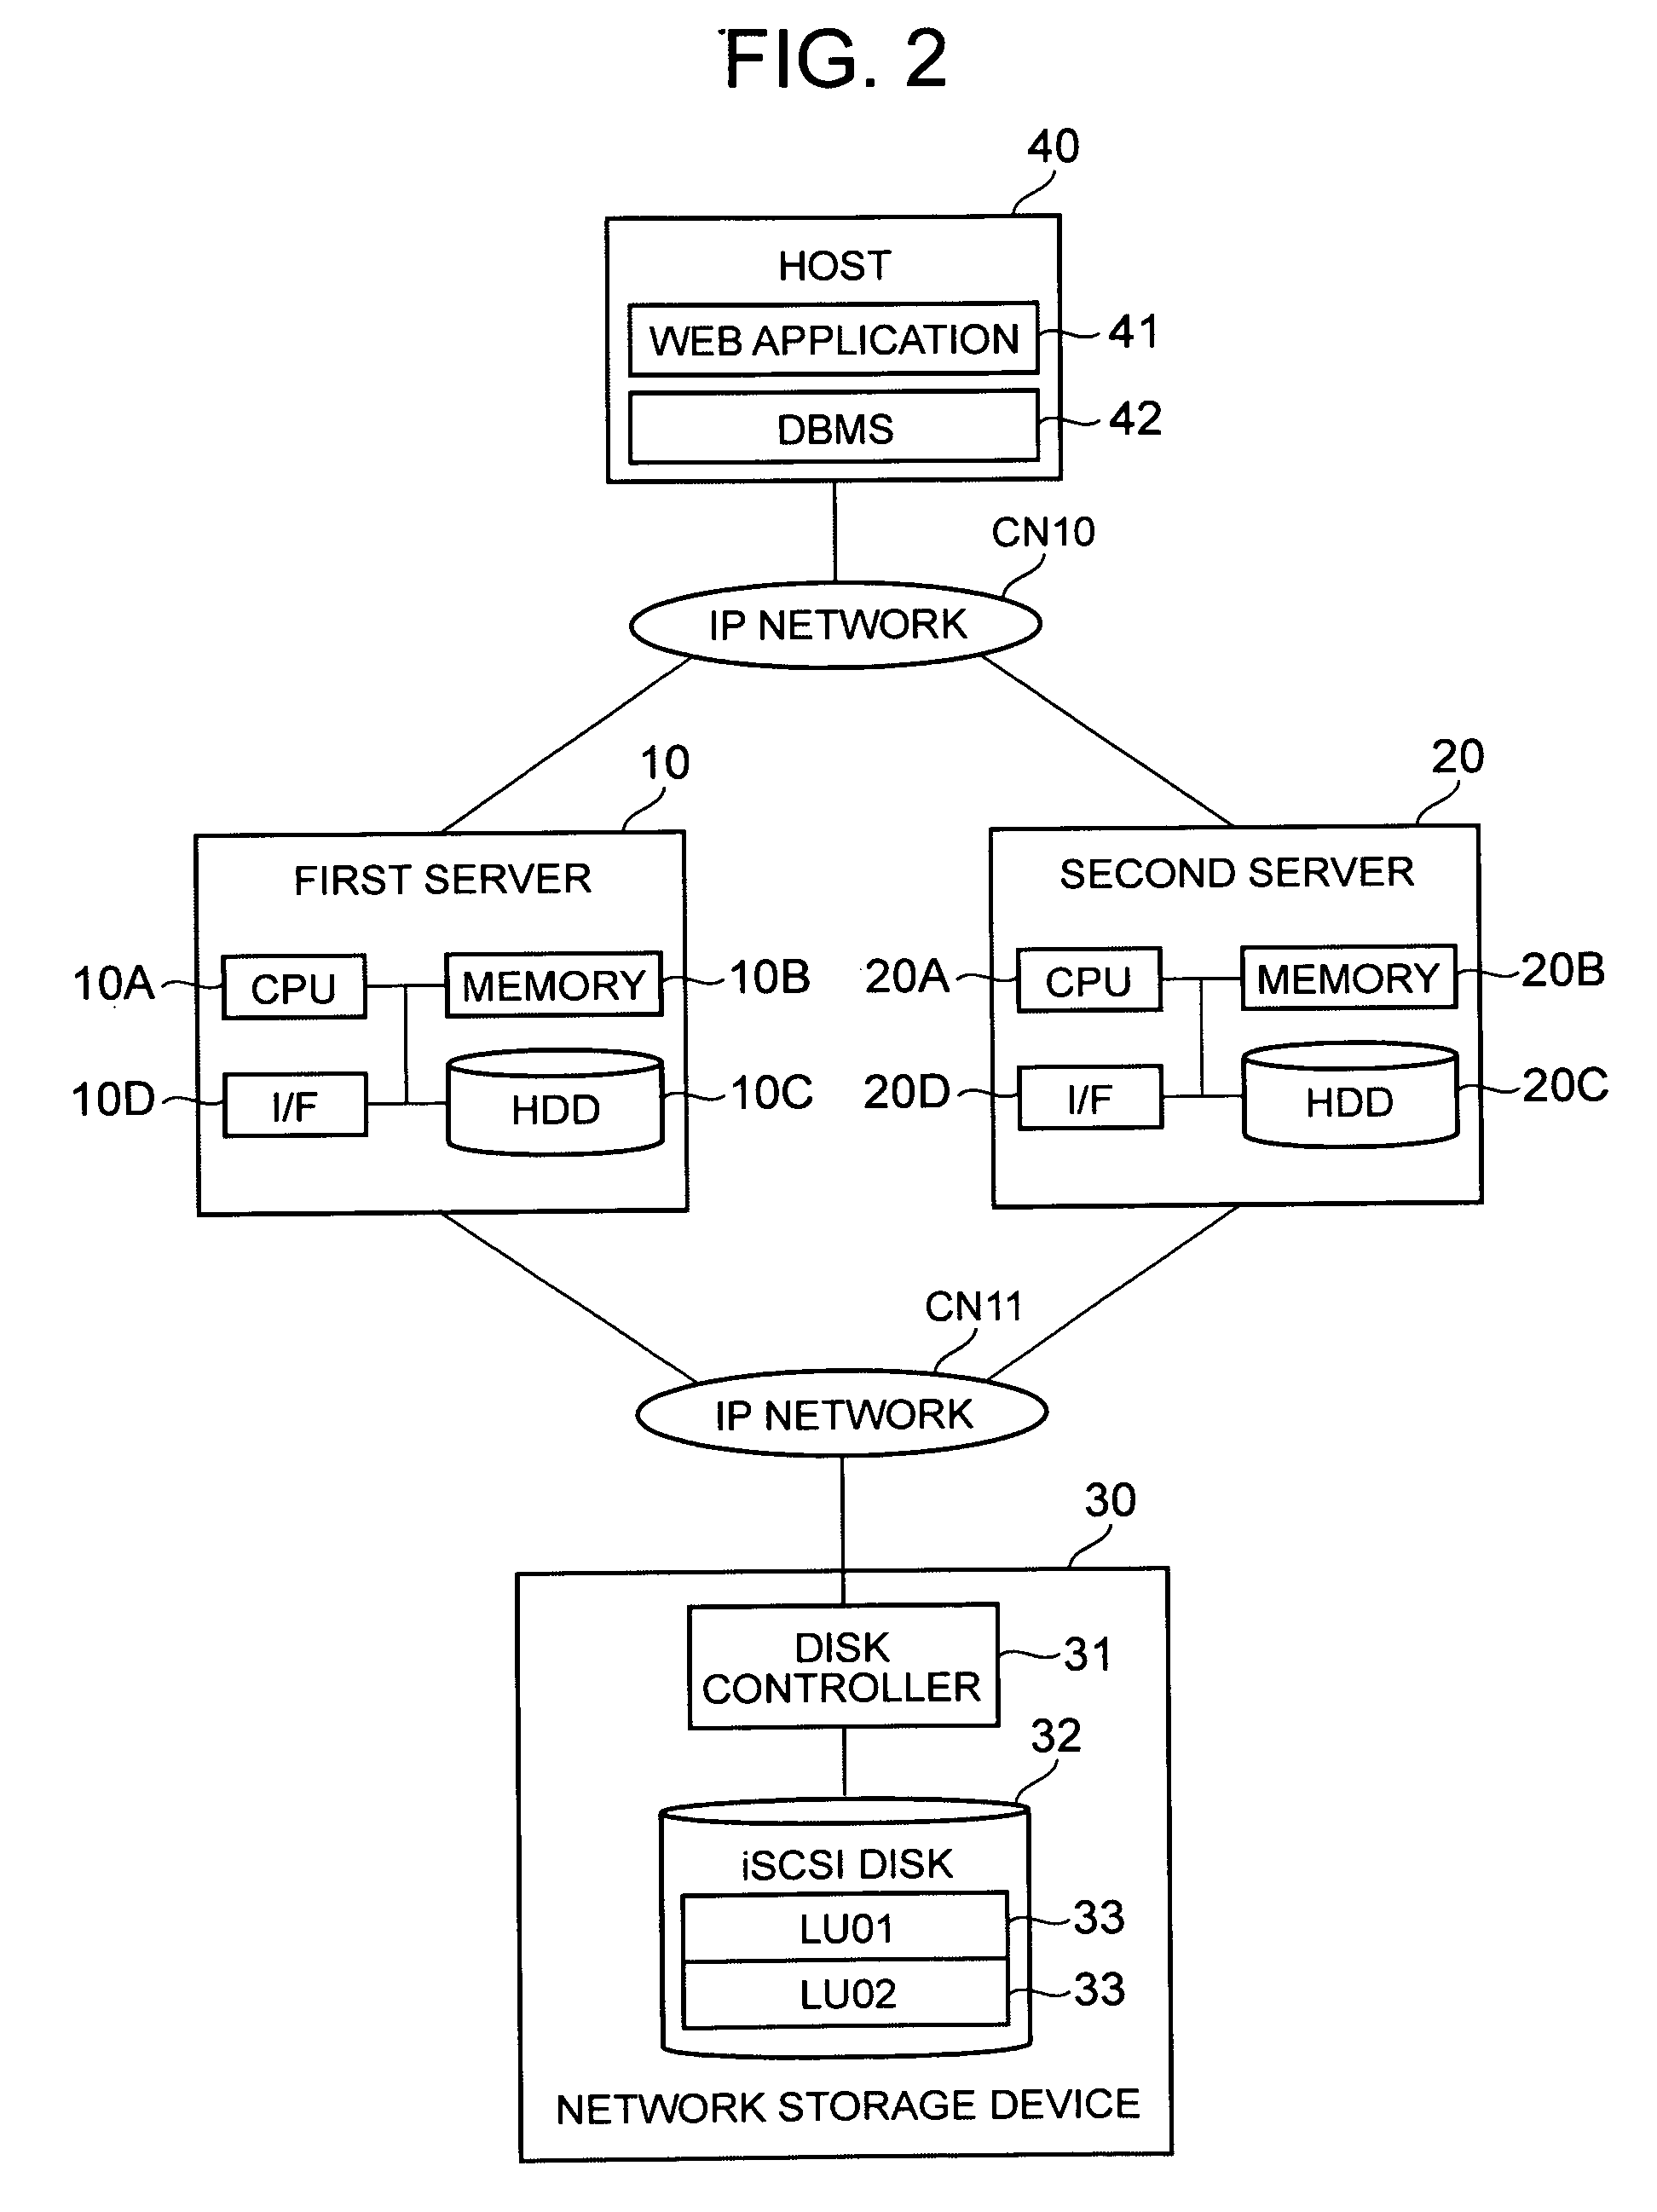 Computer system, remote copy method and first computer